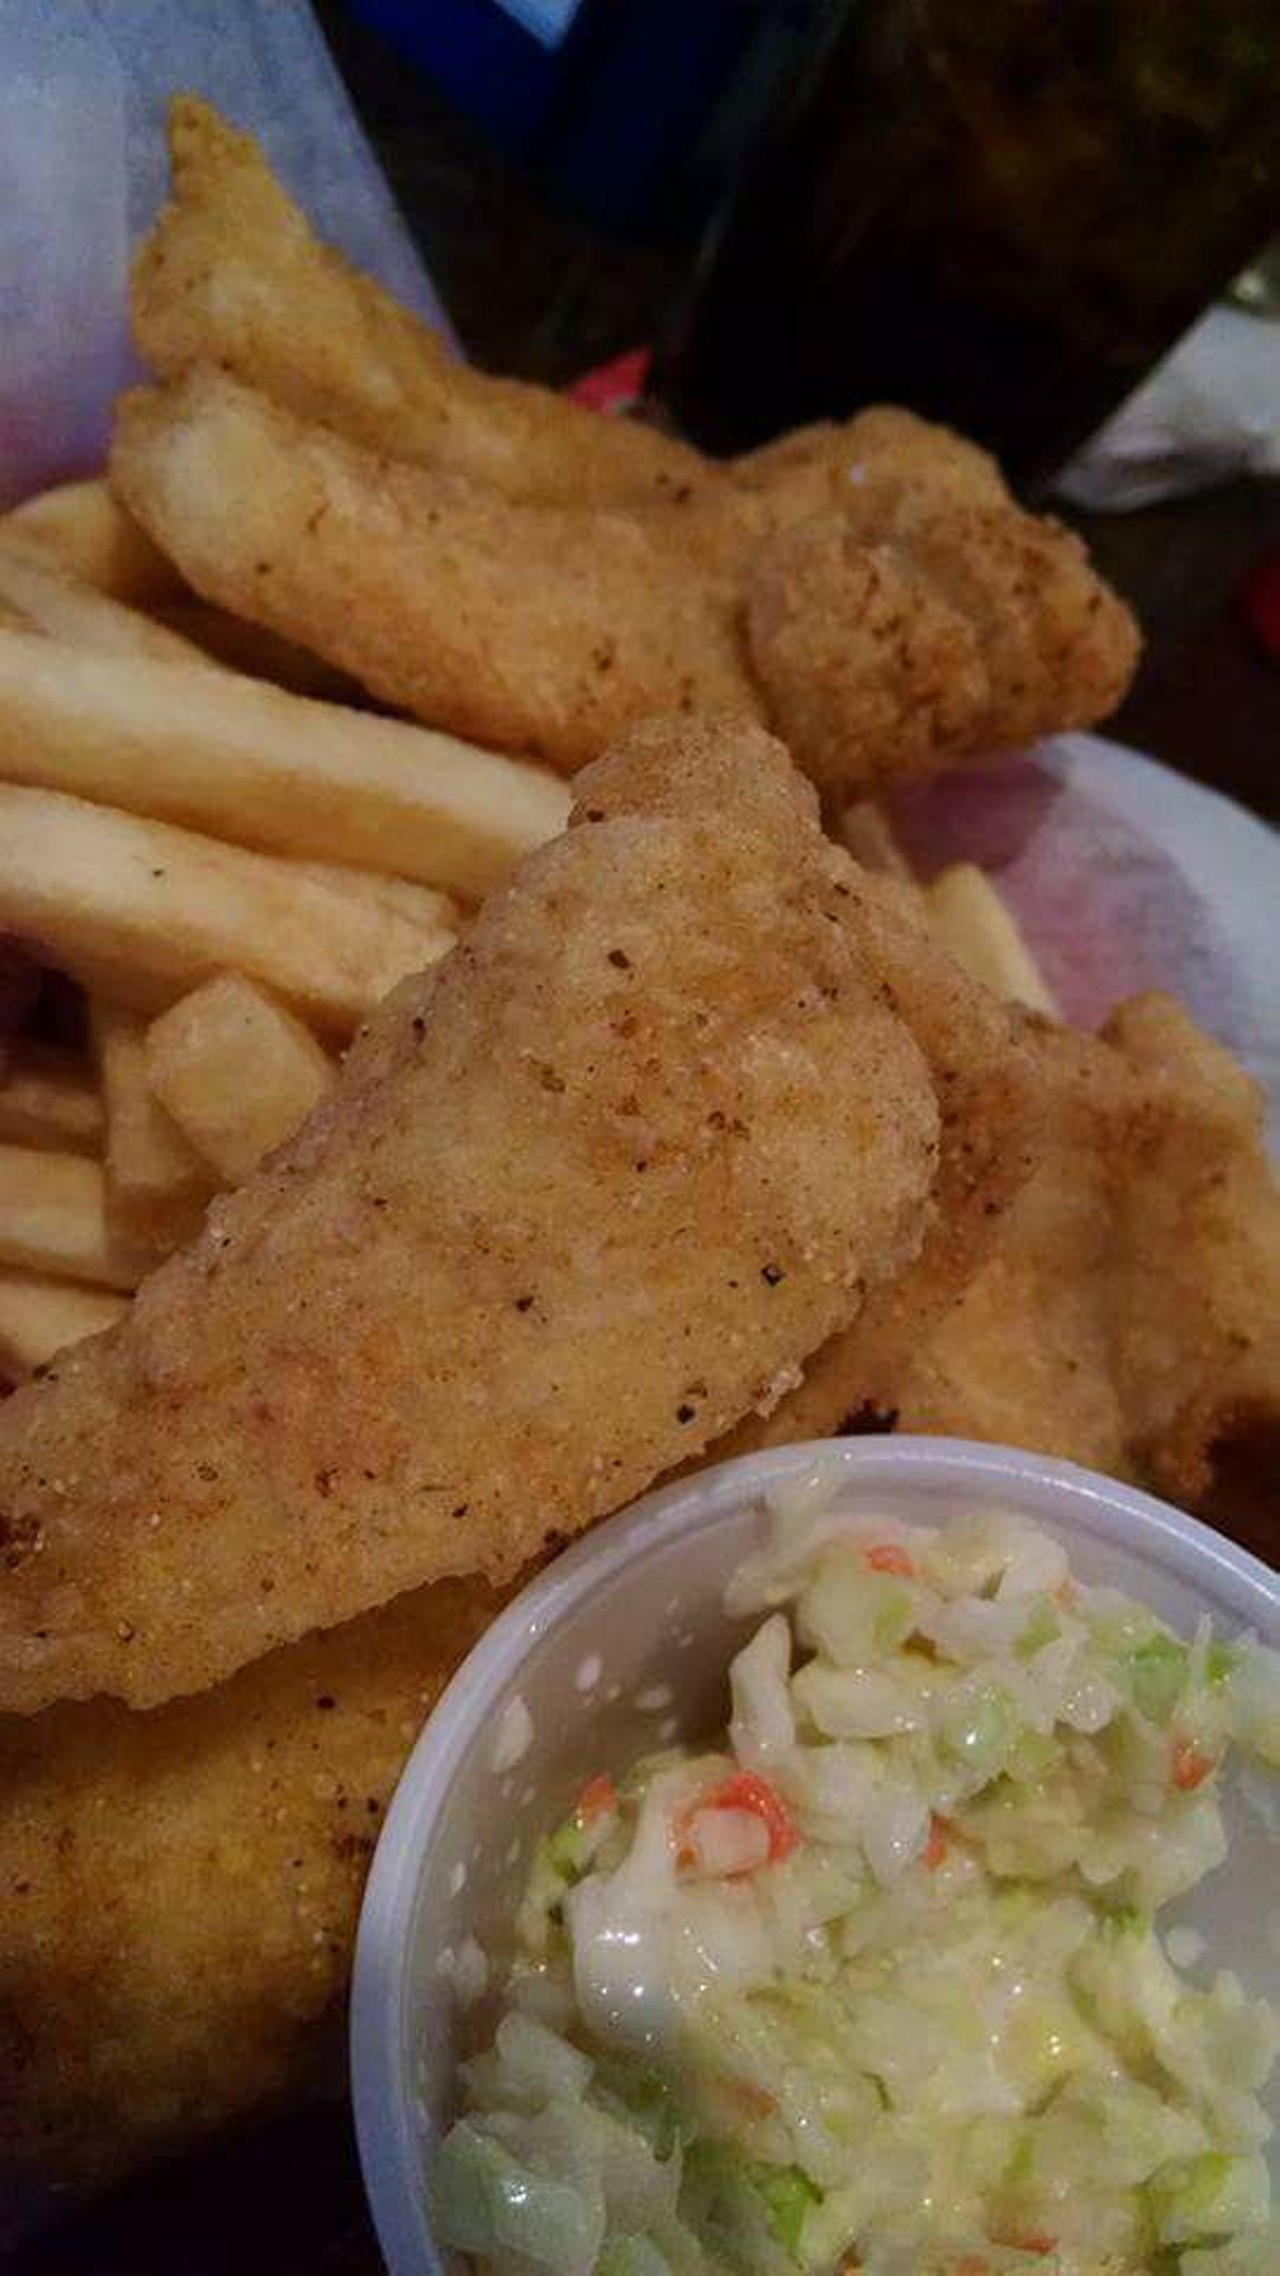 American Legion Post #484
1837 Sutton Ave., Mt Washington
More information: Fish frys held every Friday from Feb. 24 to April 7 from 4:30-8 p.m. Carryout is available.